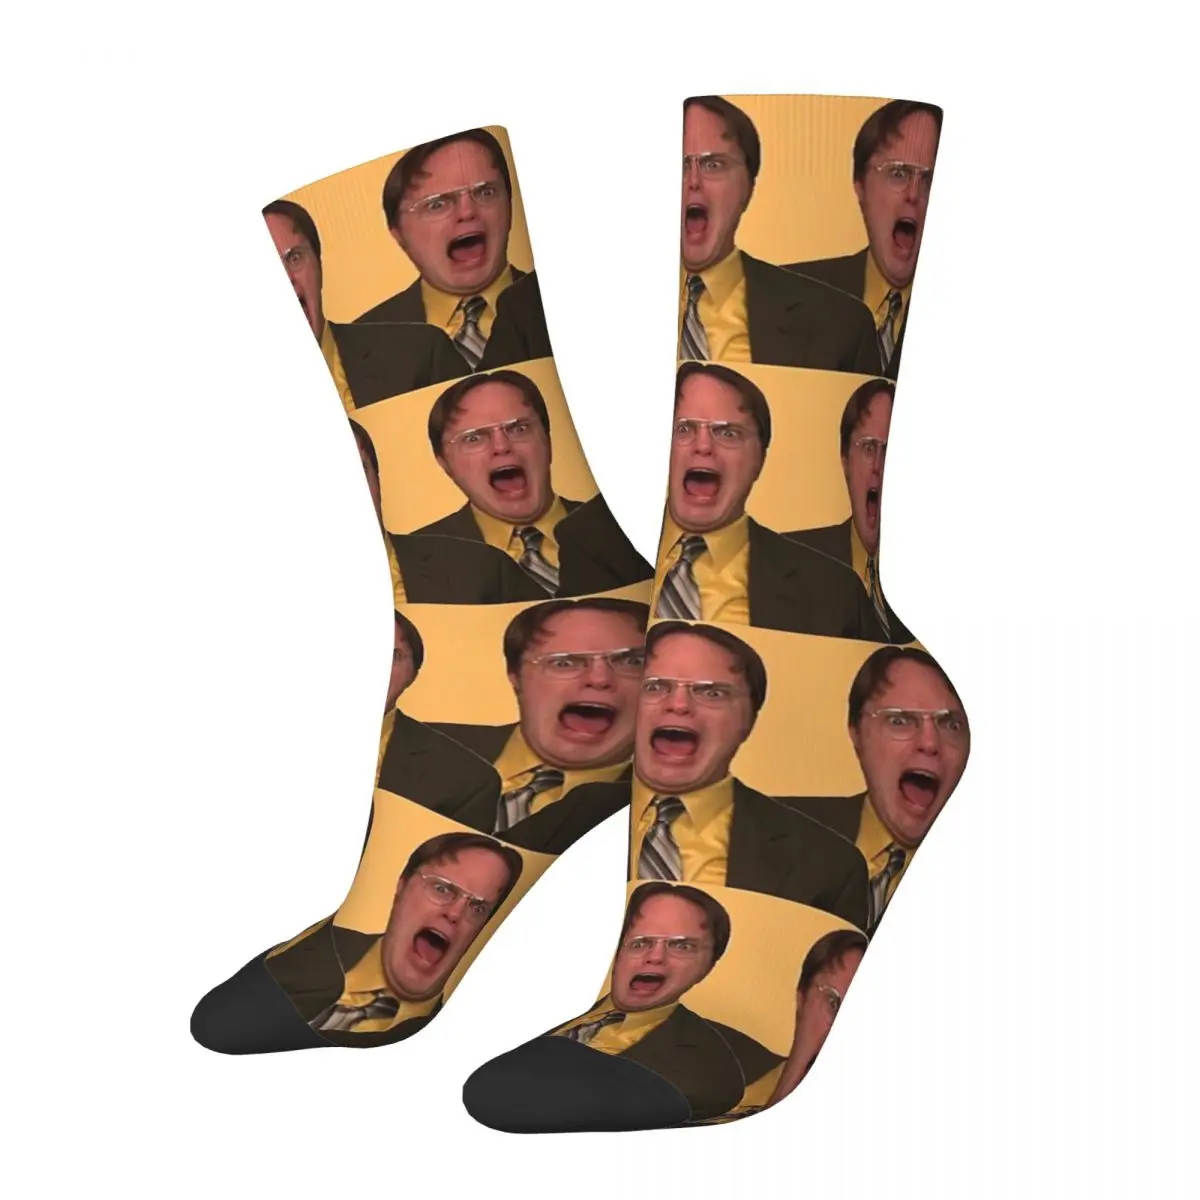 

Dwight Schrute The Office Repeat In Mustard Yellow Shirt Yelling Funny Socks for Women Men Novelty Street Style Crazy Sock Gifts